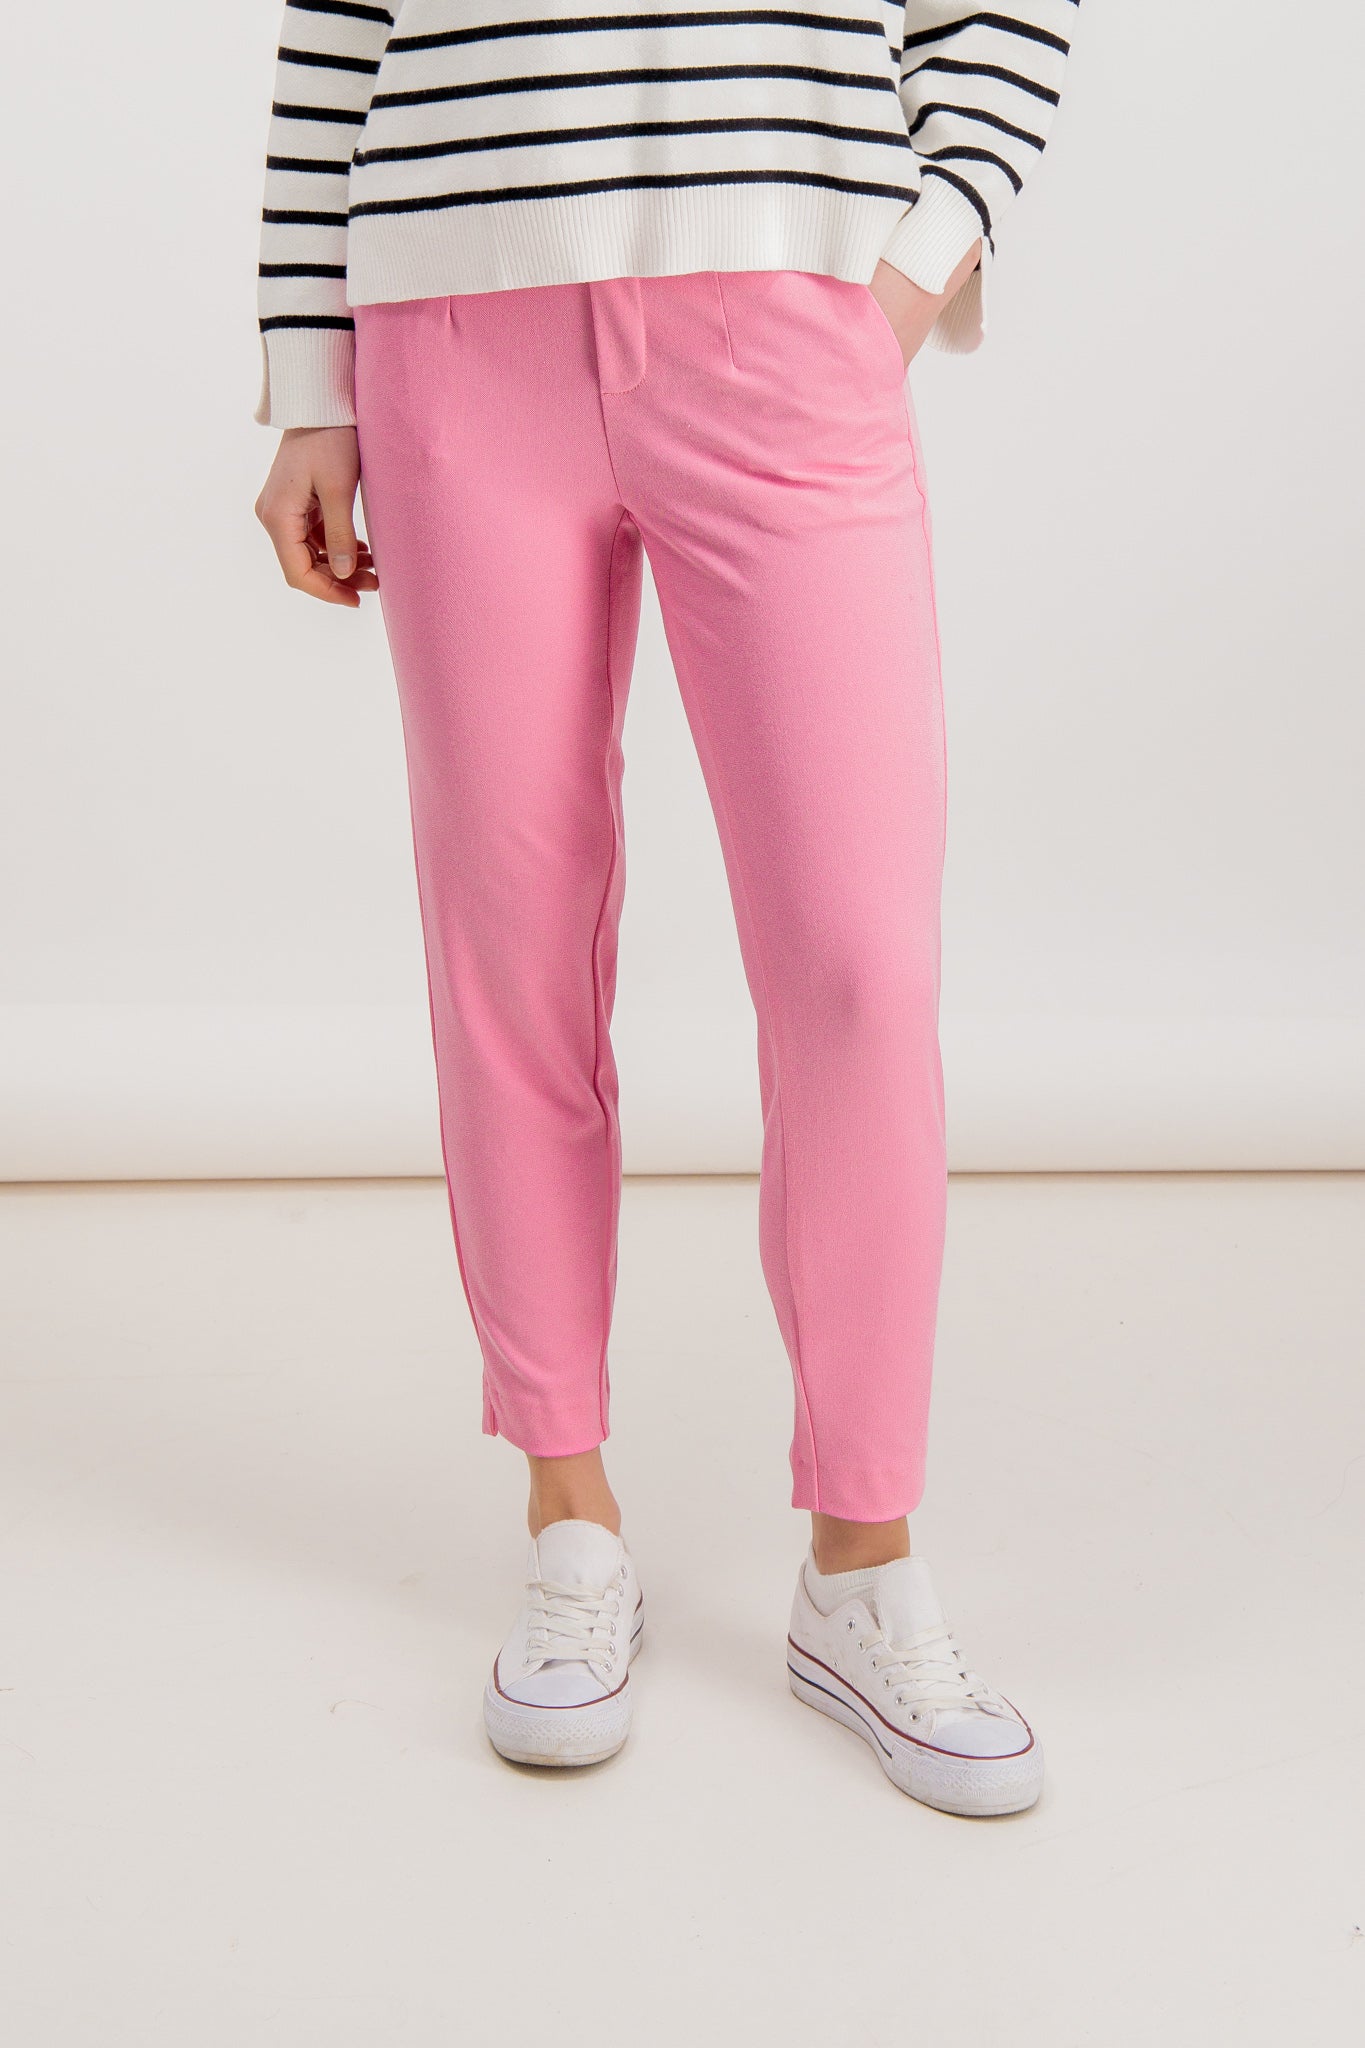 Pink Tailored Fit Pants